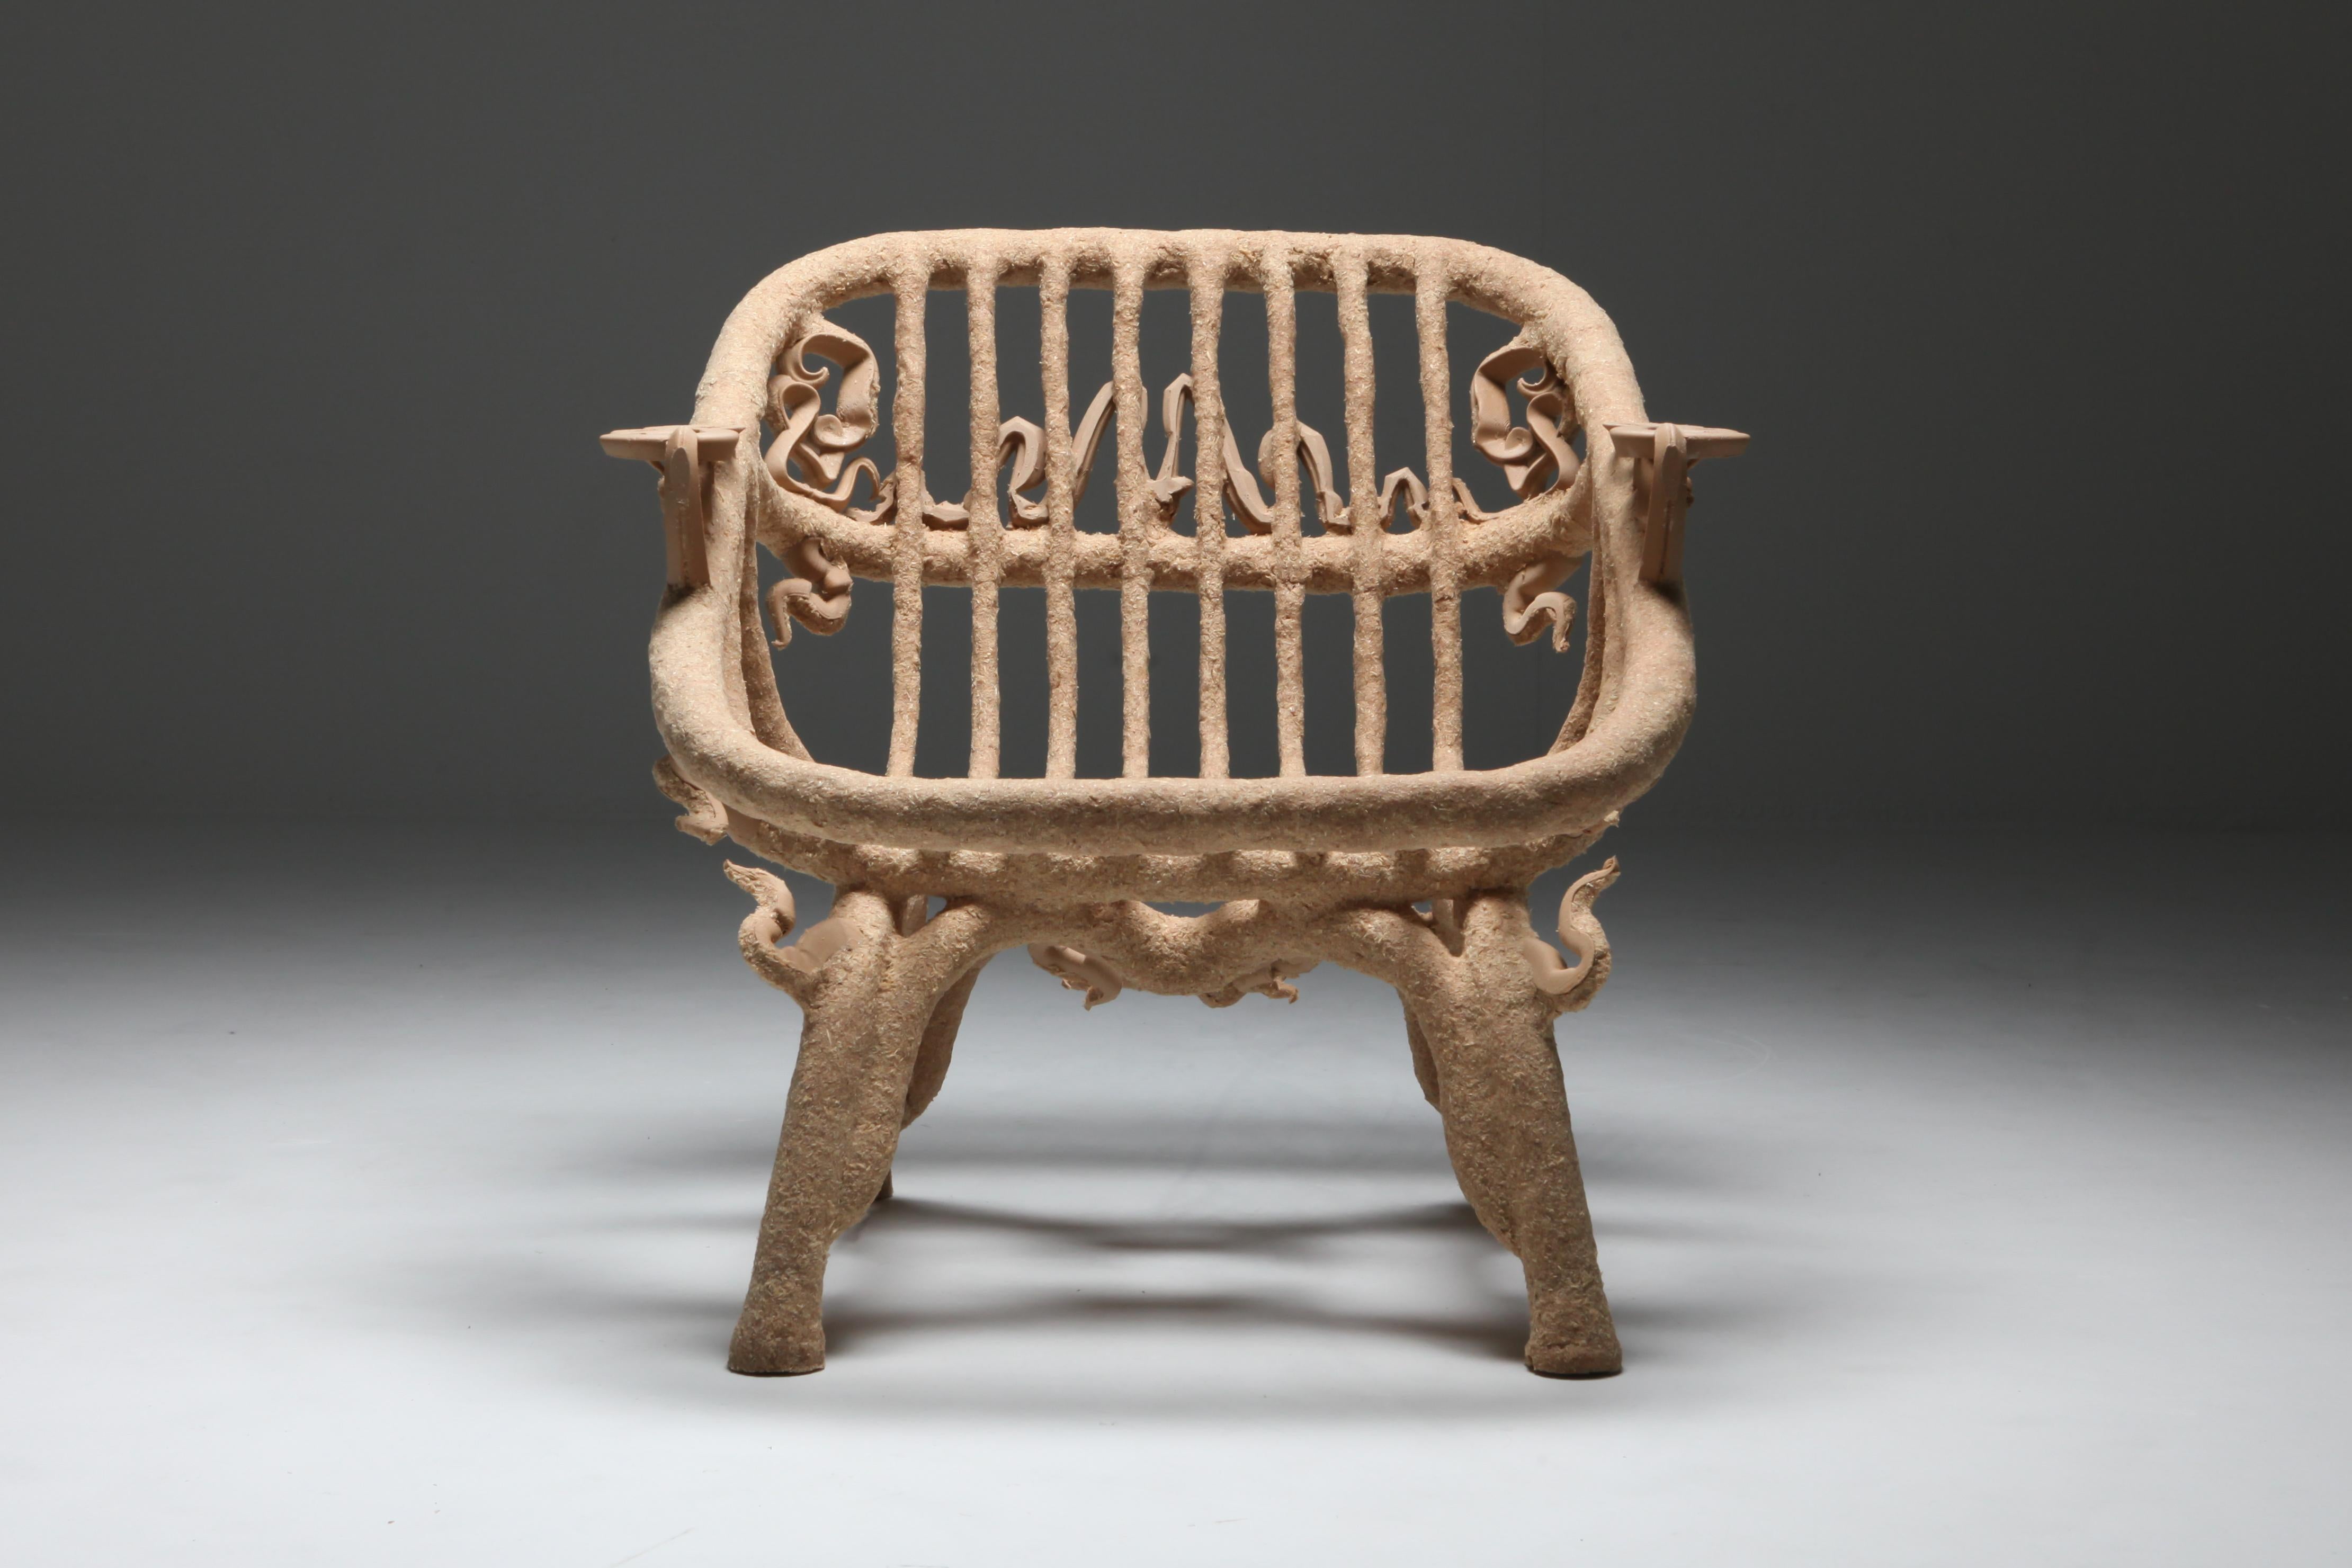 Contemporary 'Goo Lounge Chair' Wooden Chair with Ornamental Features, Schimmel & Schweikle